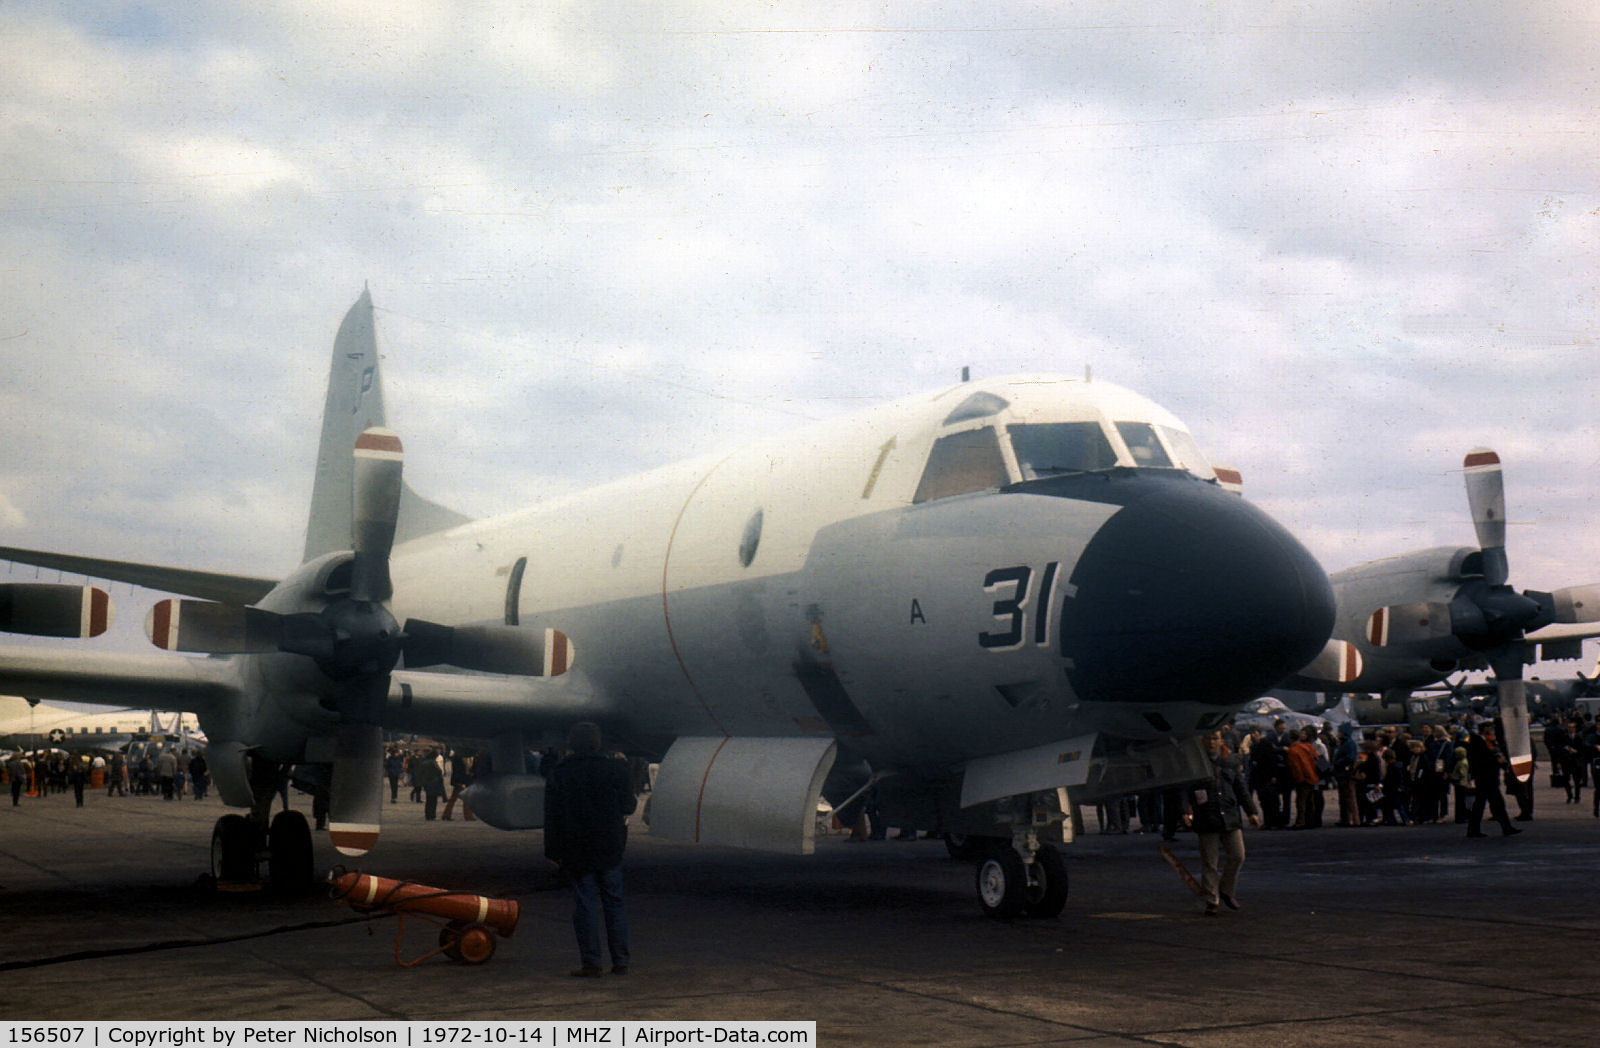 156507, Lockheed P-3C Orion C/N 285A-5501, P-3C Orion of Patrol Squadron VP-49 on display at the 1972 RAF Mildenhall Air Fete. This was the first production P-3C example.